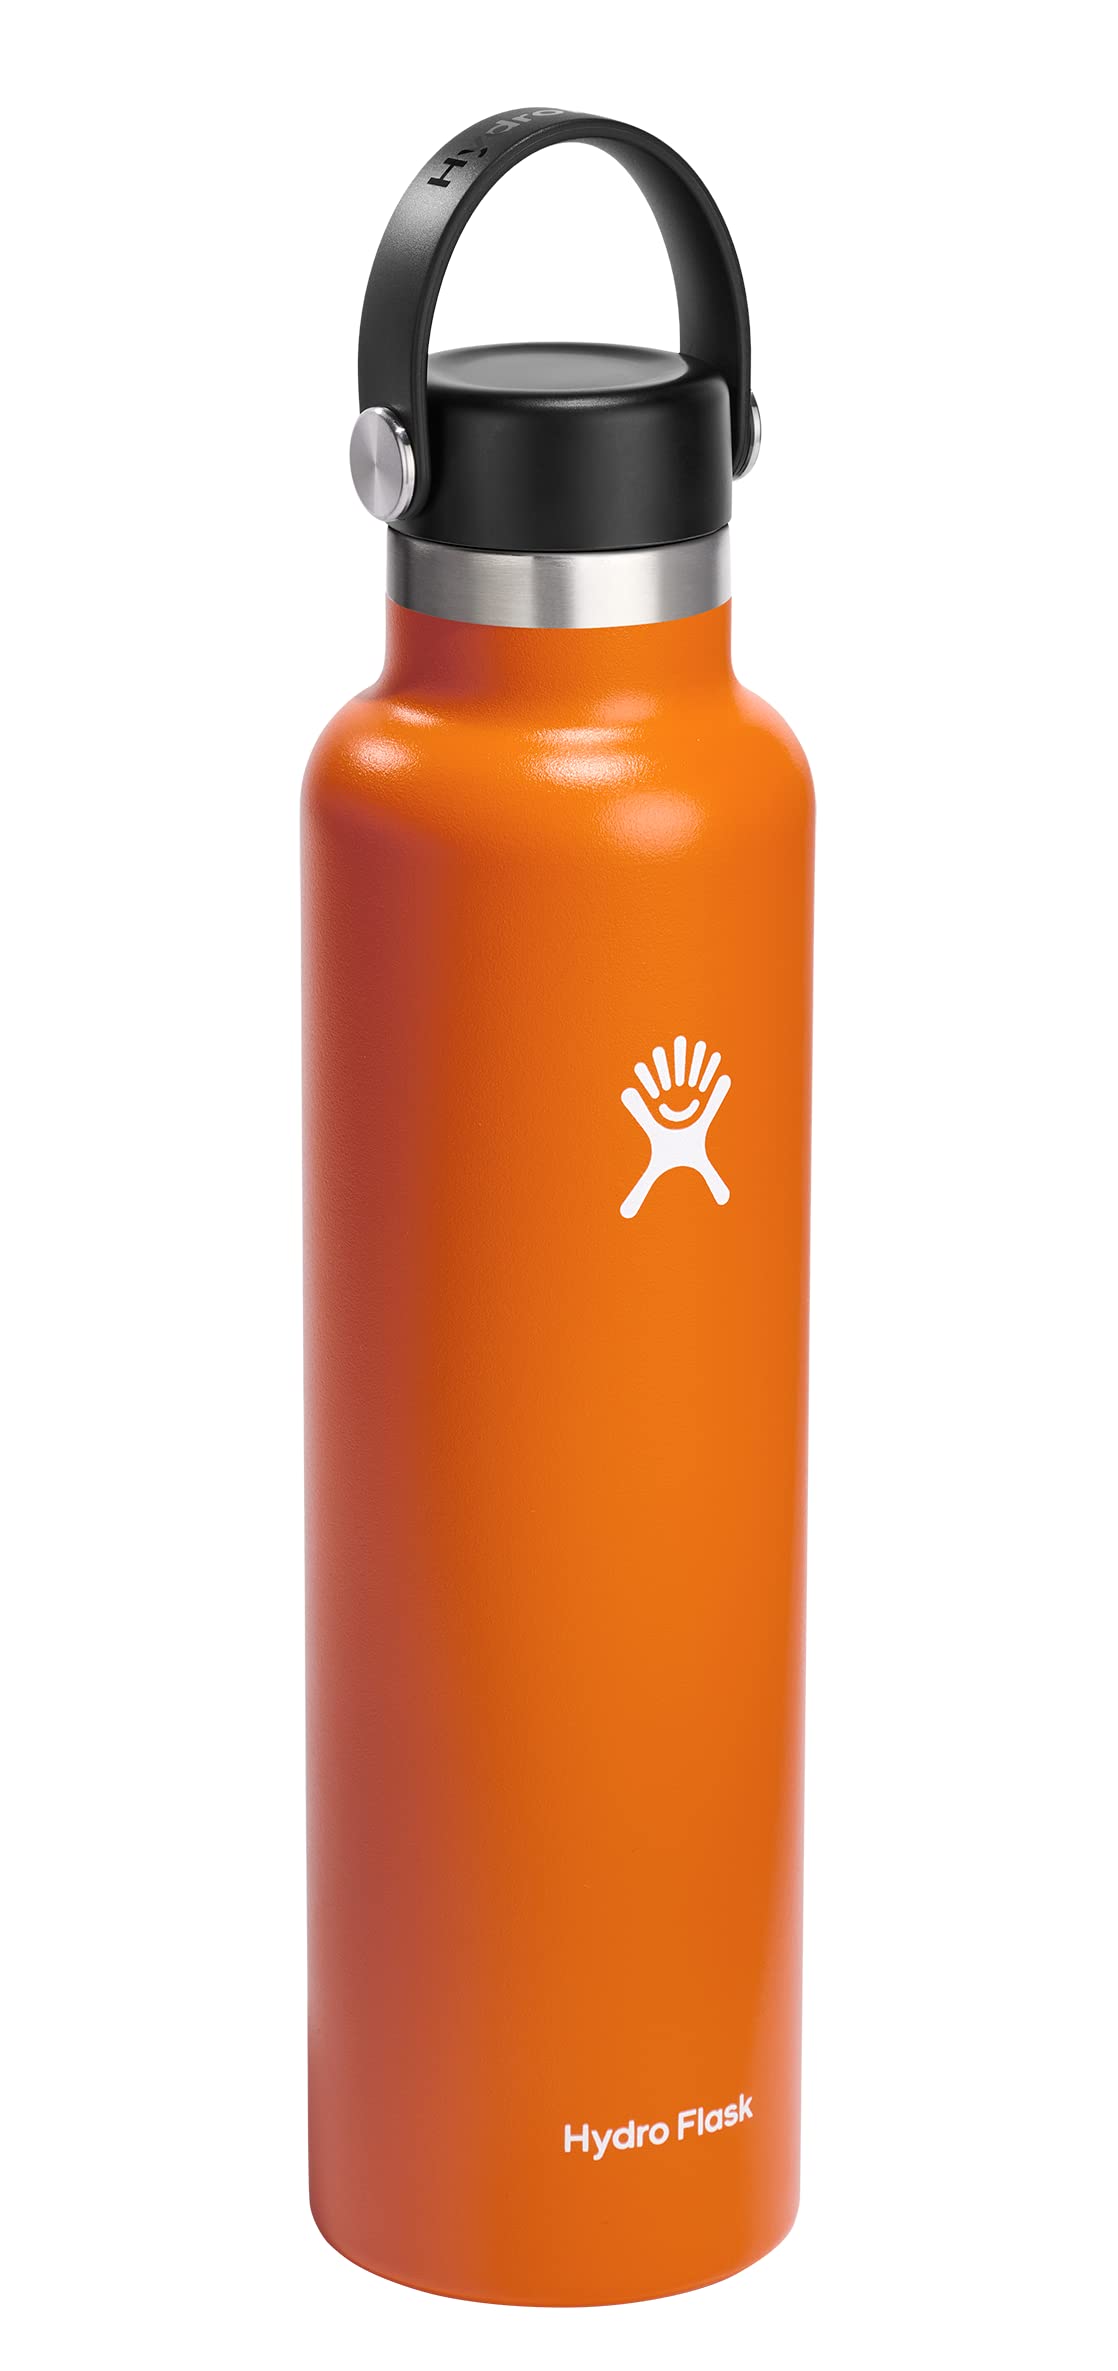 24-Oz Hydro Flask Stainless Steel Standard Mouth Water Bottle with Flex Cap and Double-Wall Vacuum Insulation (Mesa) $17.87 + Free S&H w/ Prime or $35+